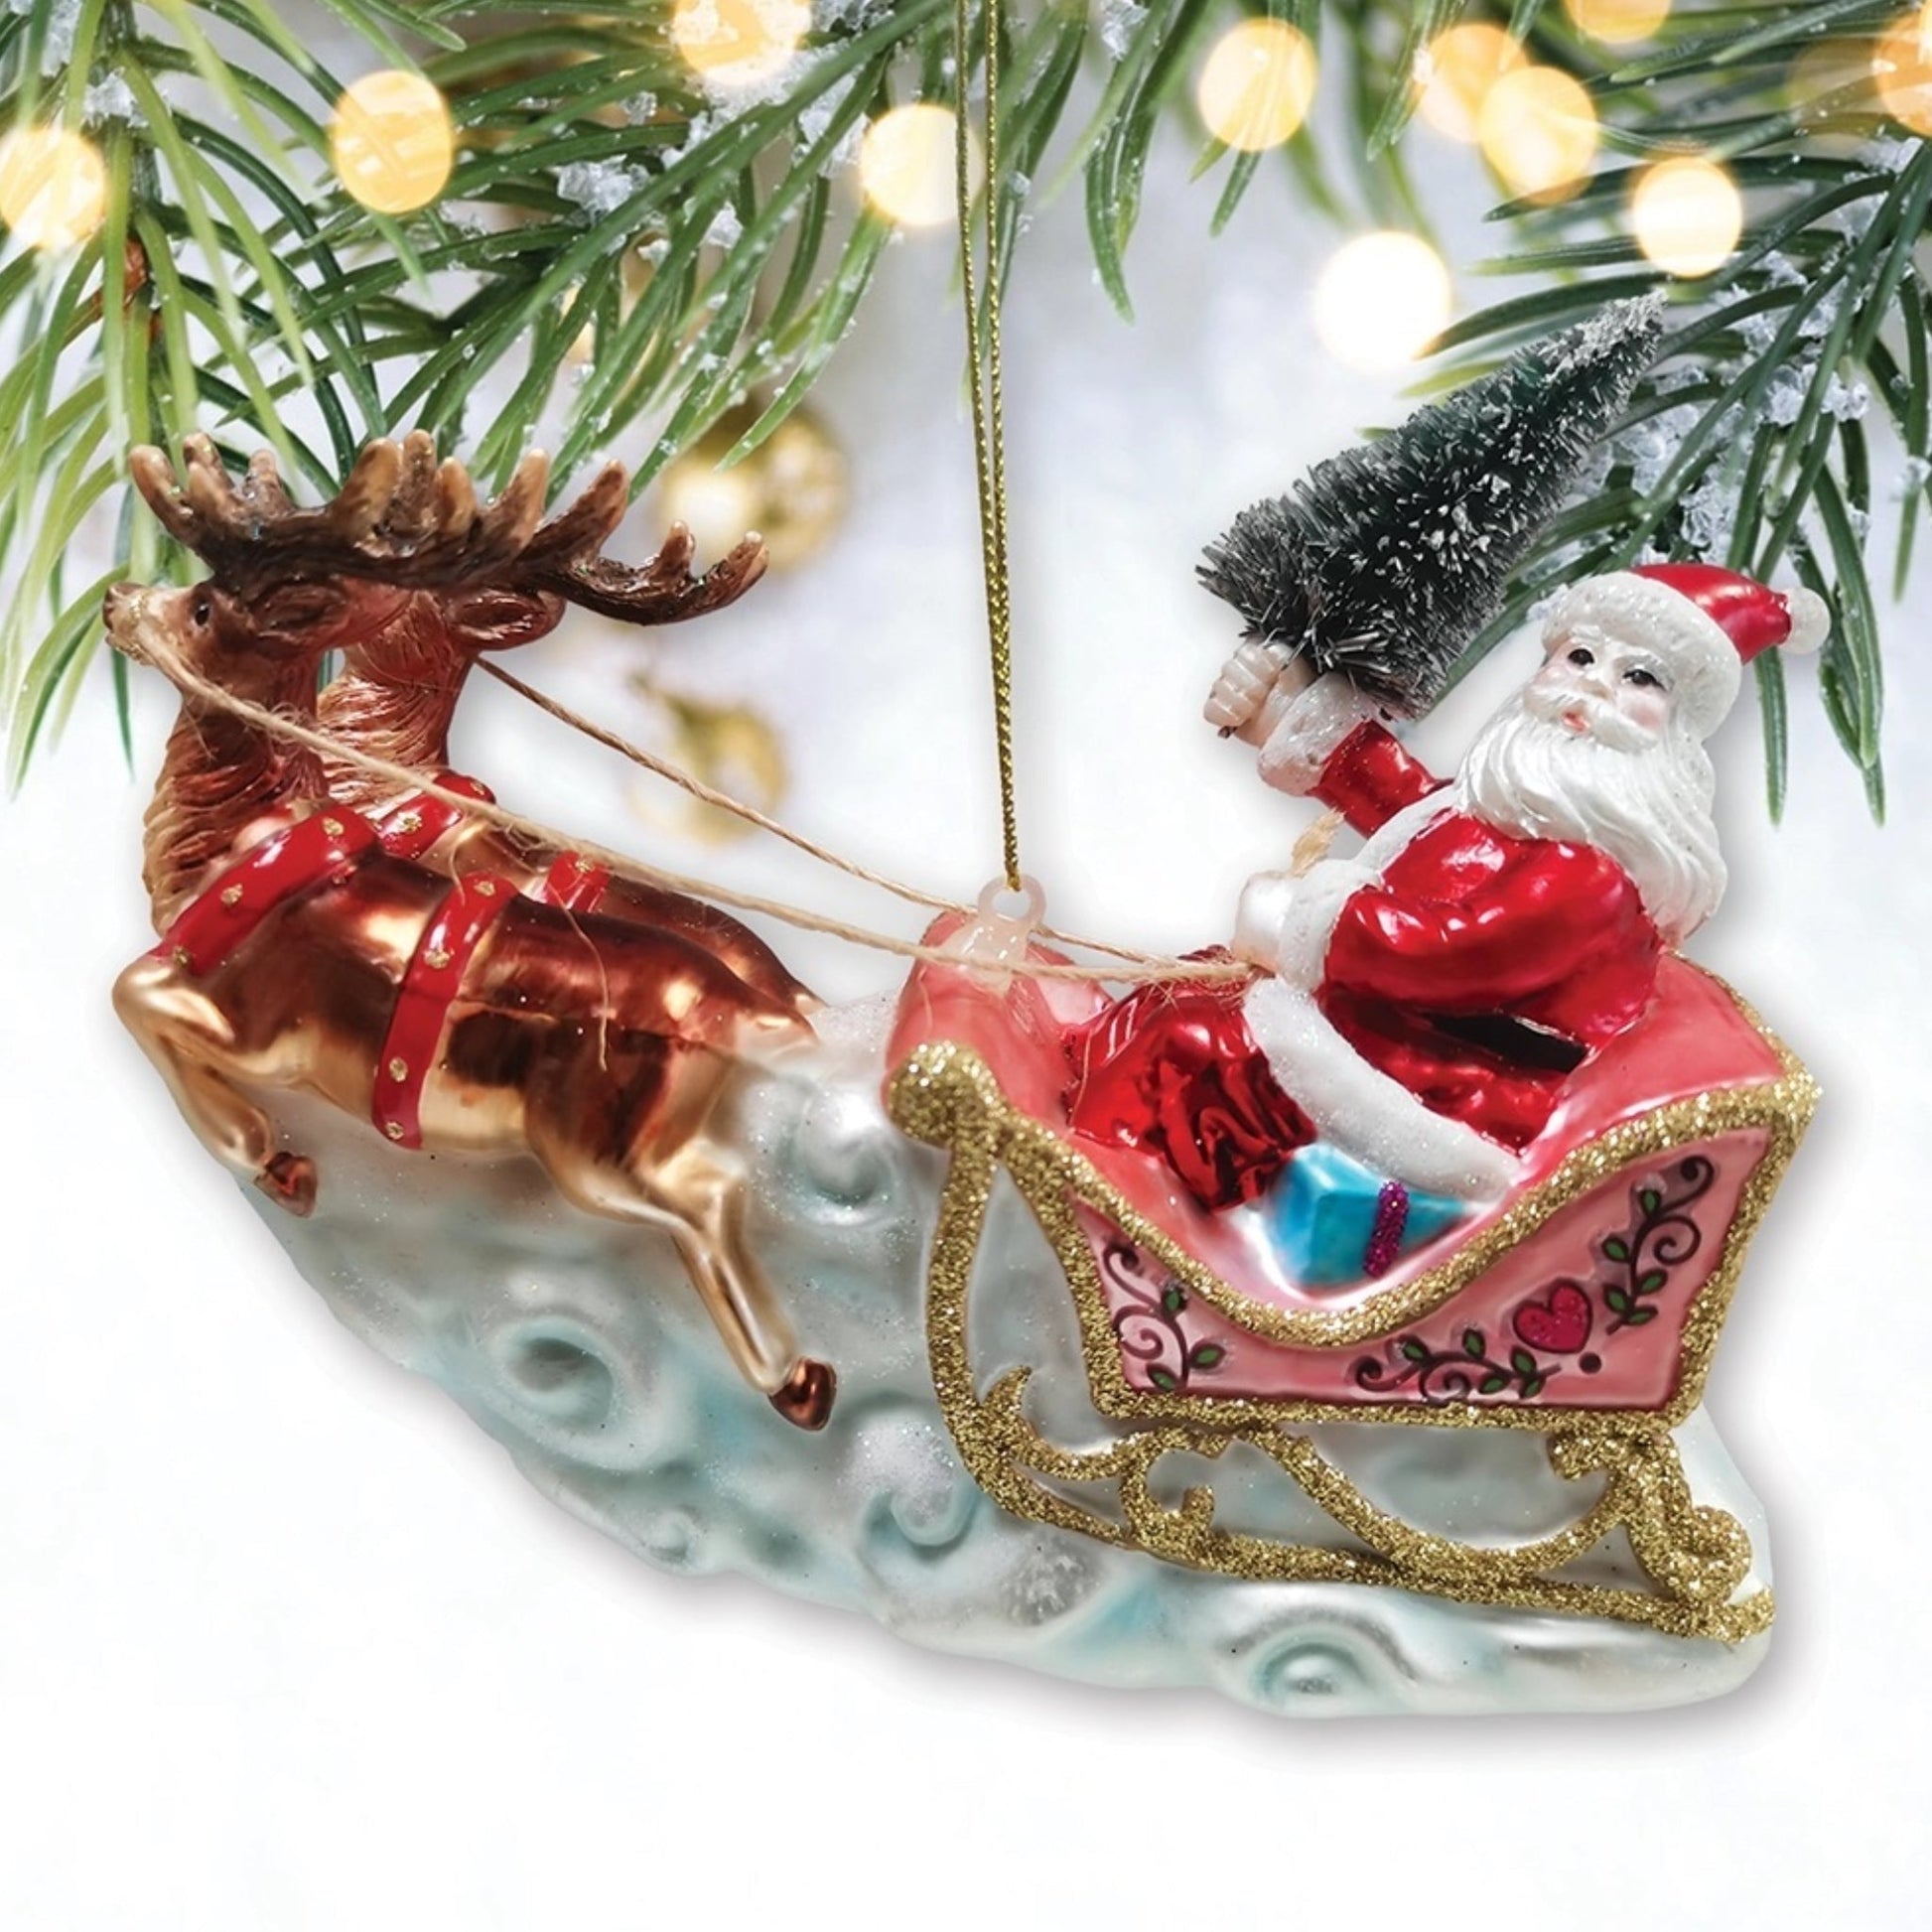 Santa's Sleigh and Reindeer Glass Christmas Ornaments - Made in the USA